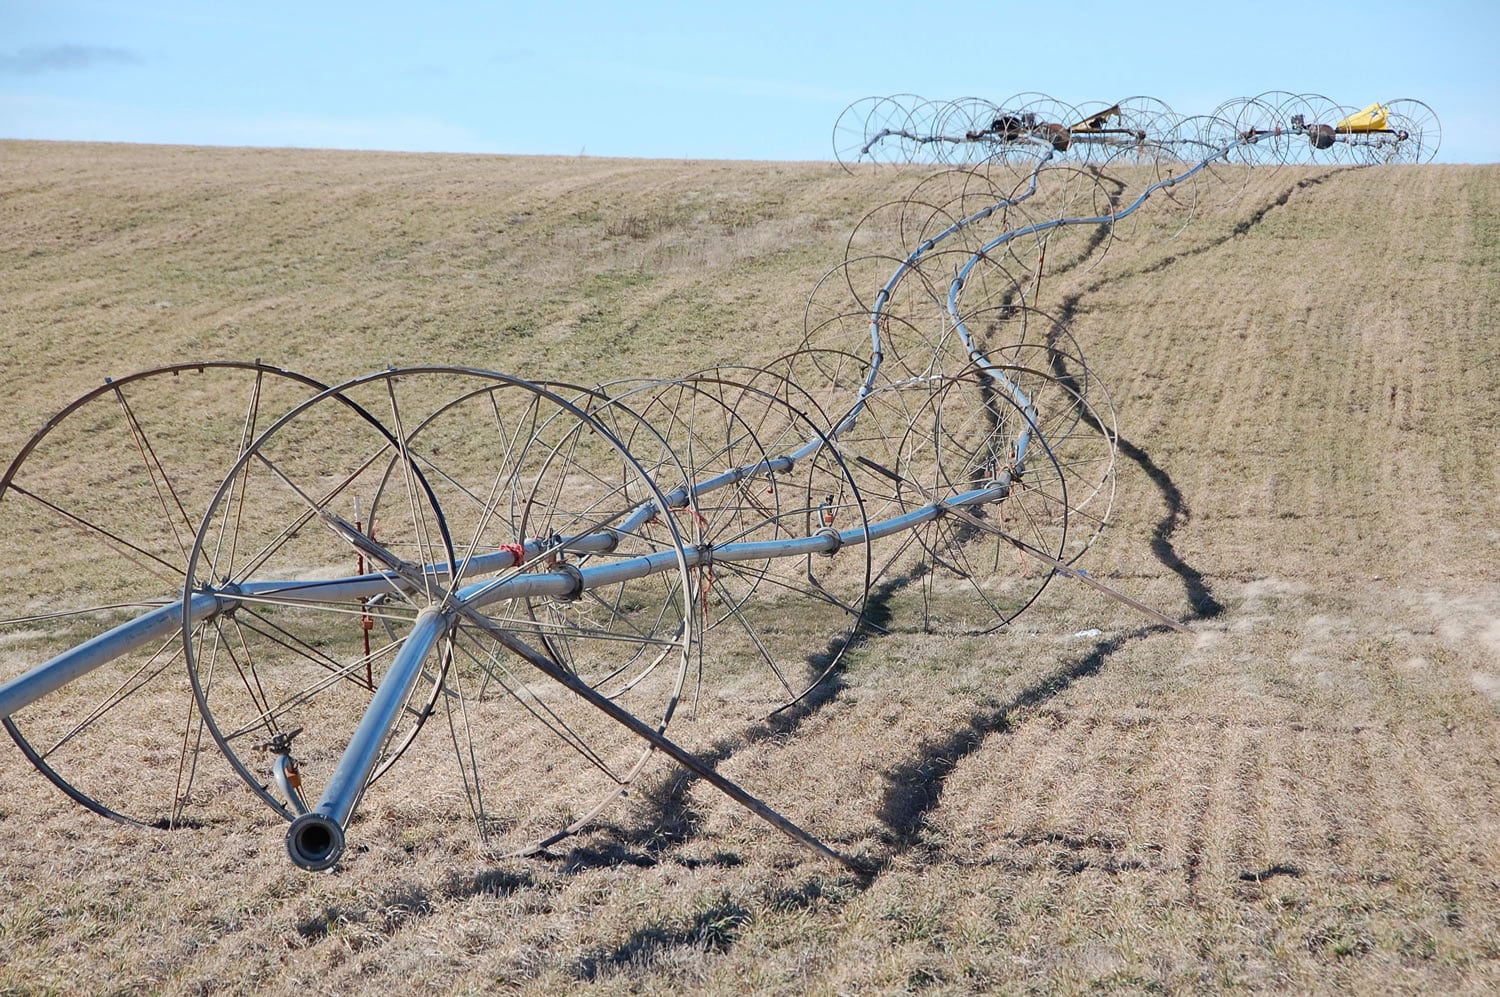 Wheel lines, which during growing season disperse water supplied by the North Unit Irrigation District, sit in a field south of Madras, Ore., on Feb. 2. Lawsuits over spotted frogs concern Central Oregon farmers.